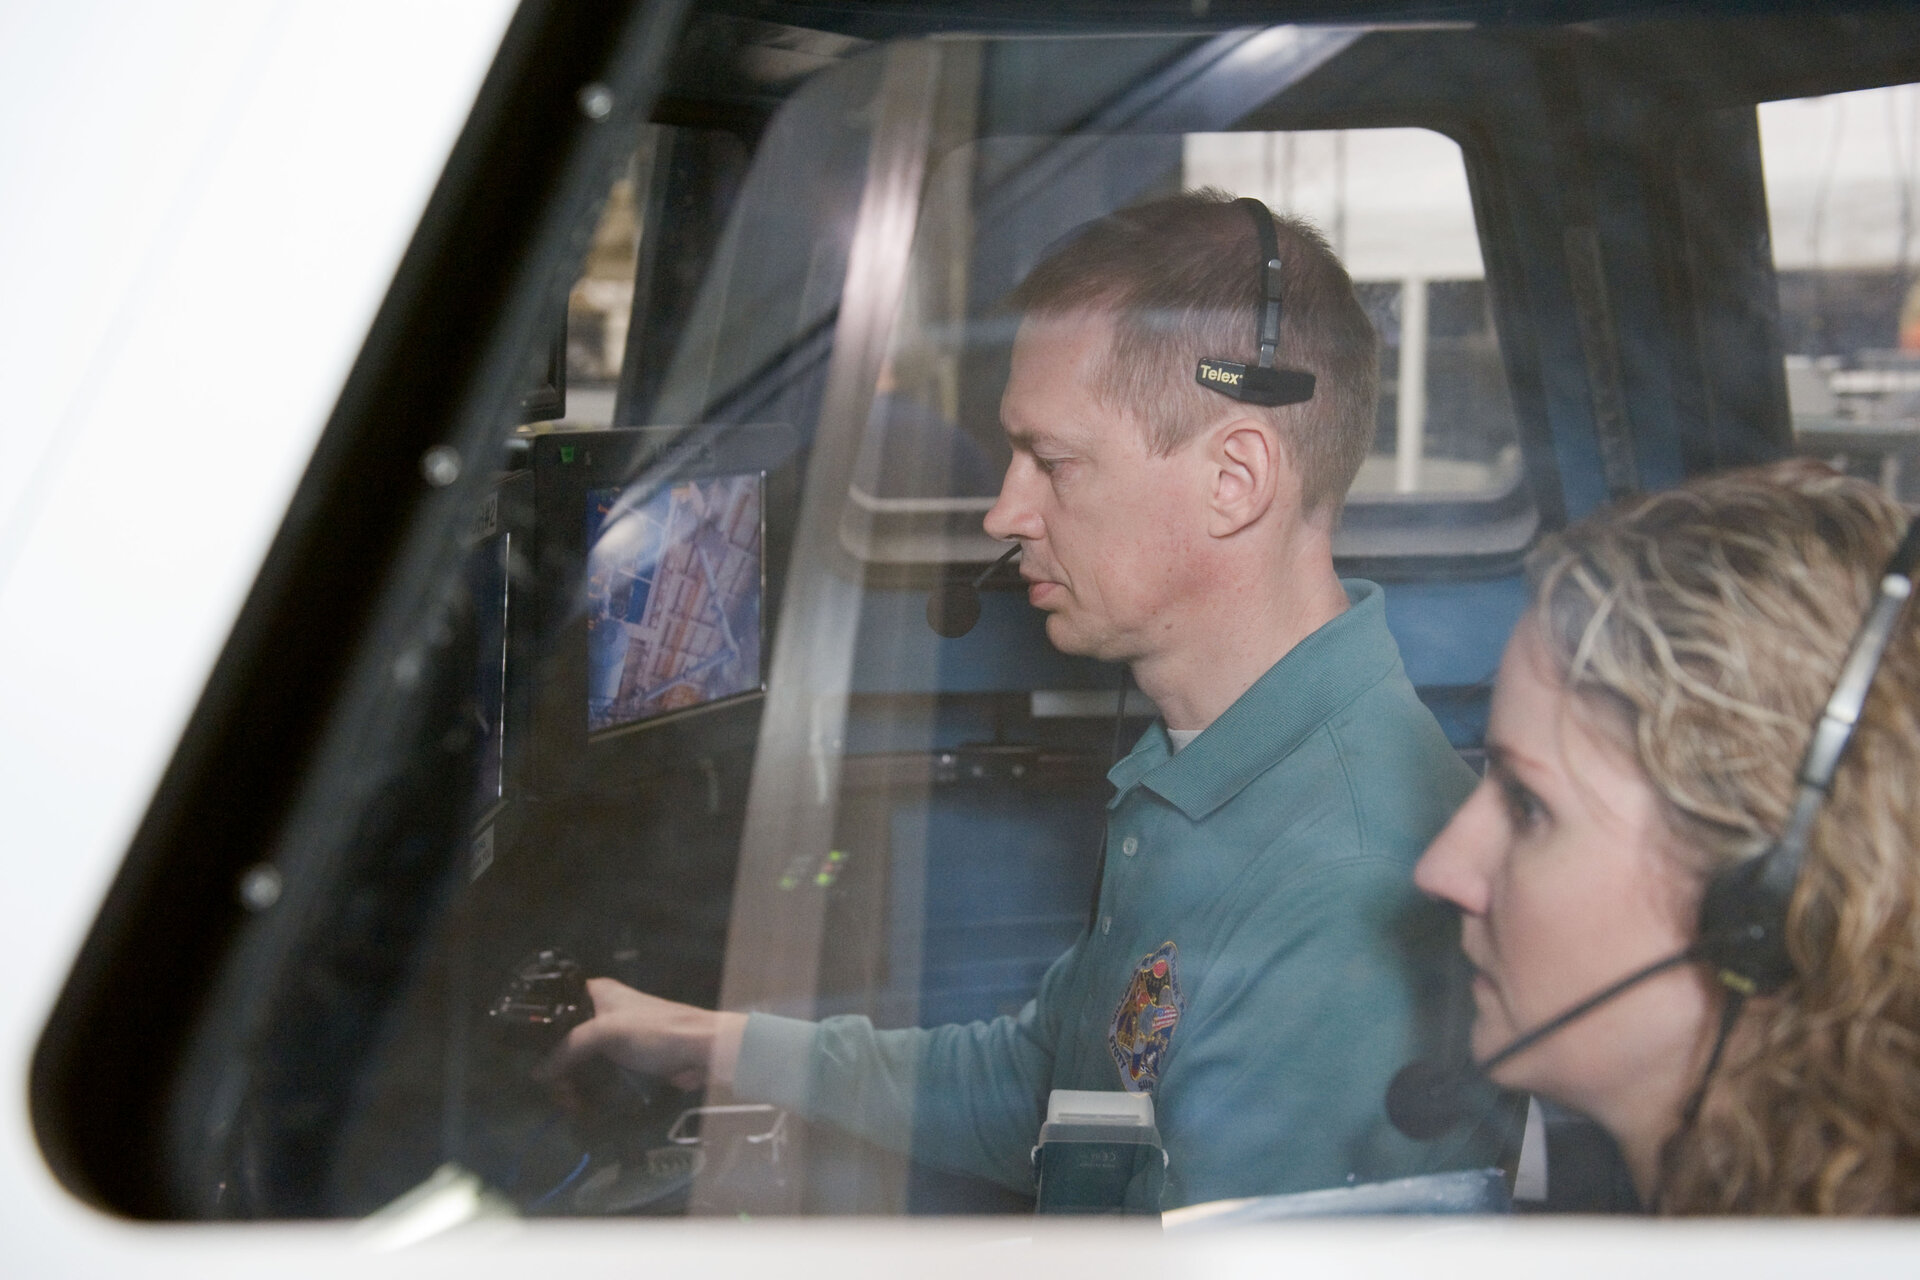 Frank De Winne during a training session in the Cupola mock-up at JSC